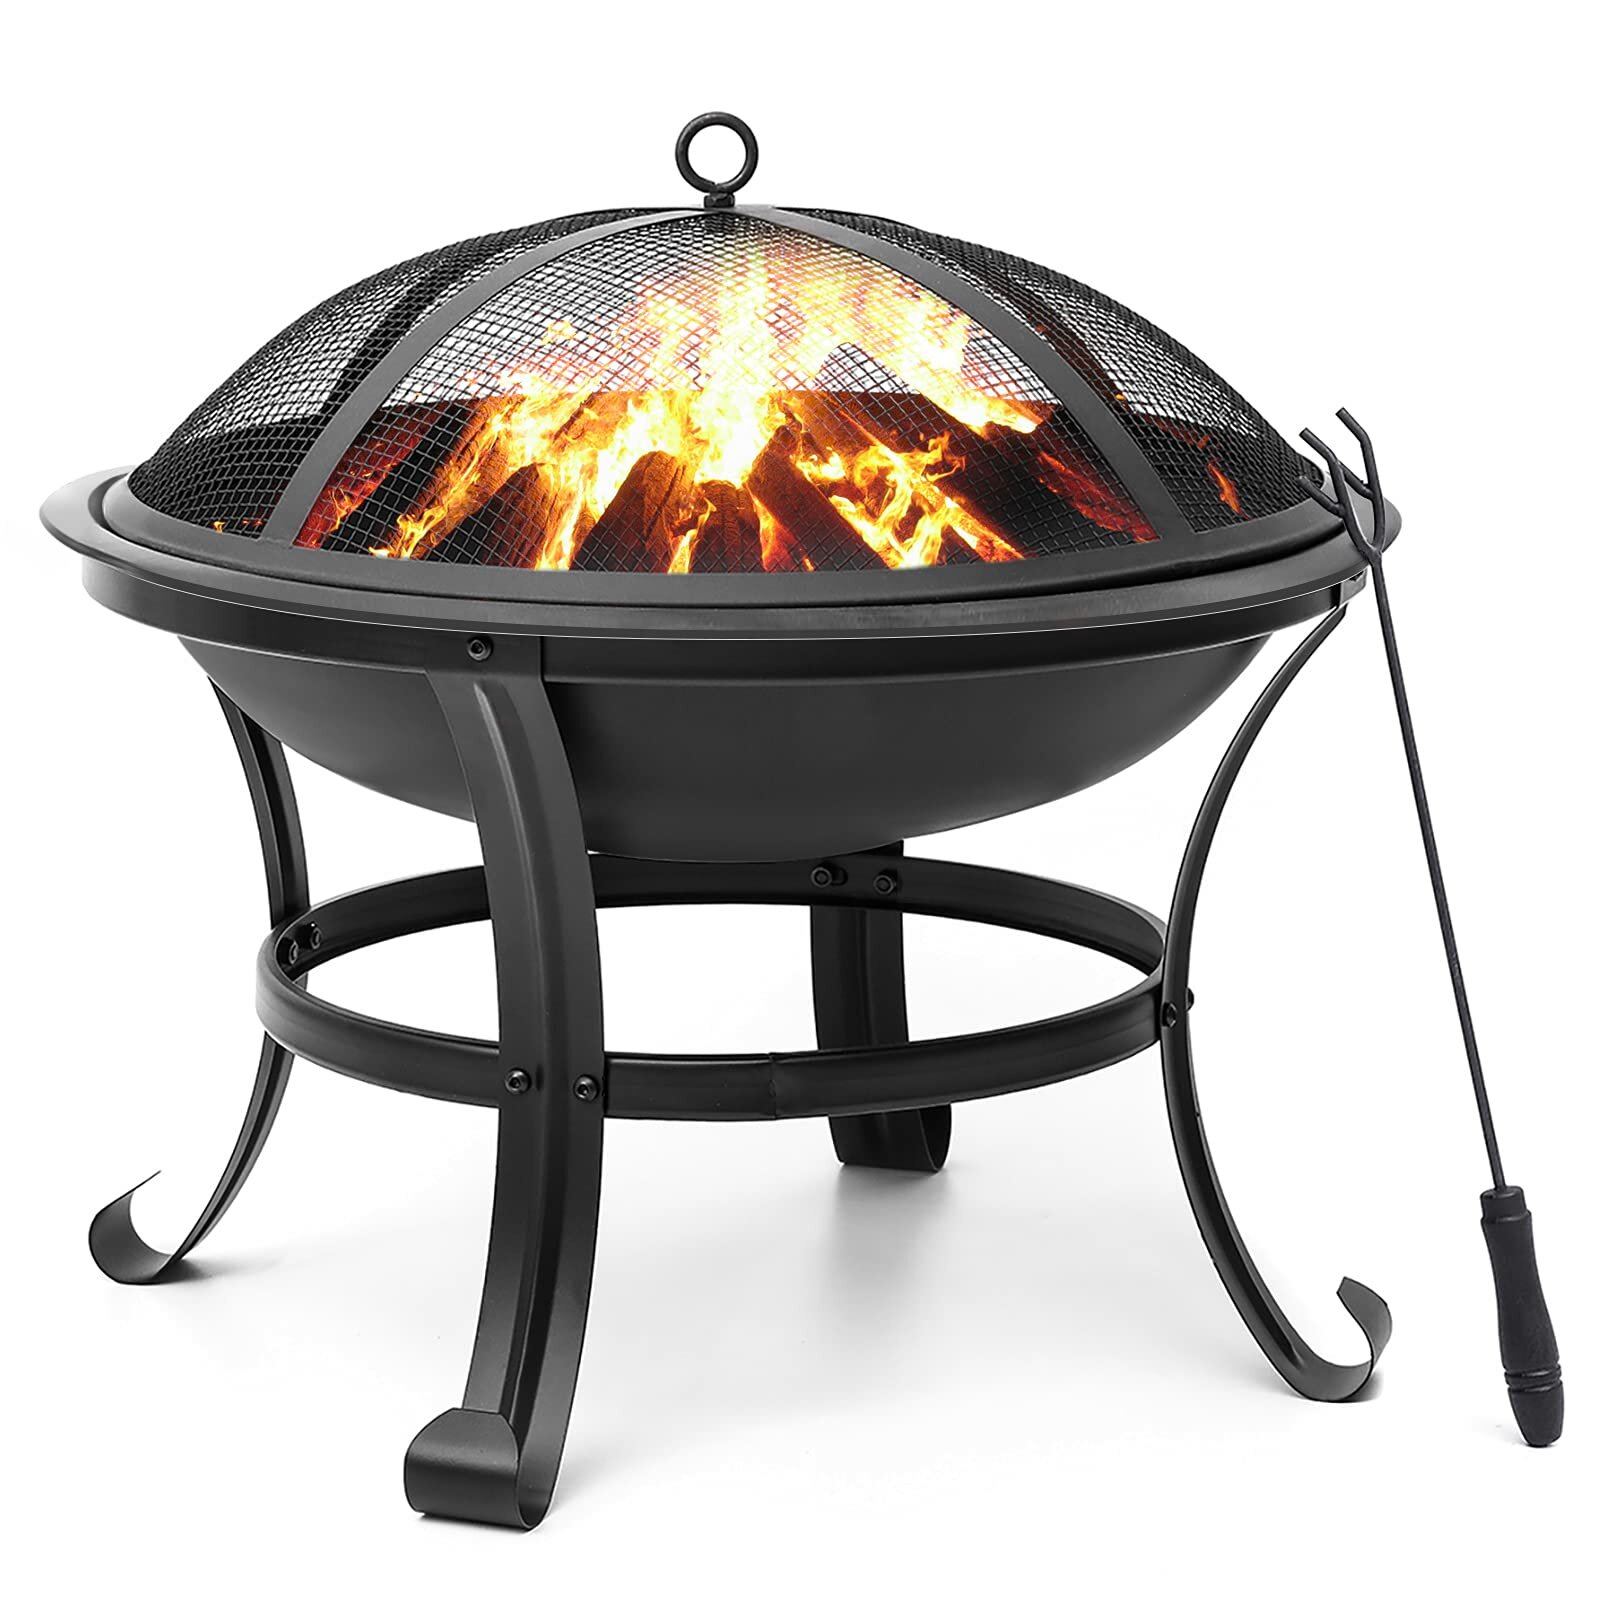 

SINGLYFIRE 22 inch Fire Pit for Outside Outdoor Wood Burning Pit Steel Firepit Bowl BBQ Grill for Patio Camping Backyard